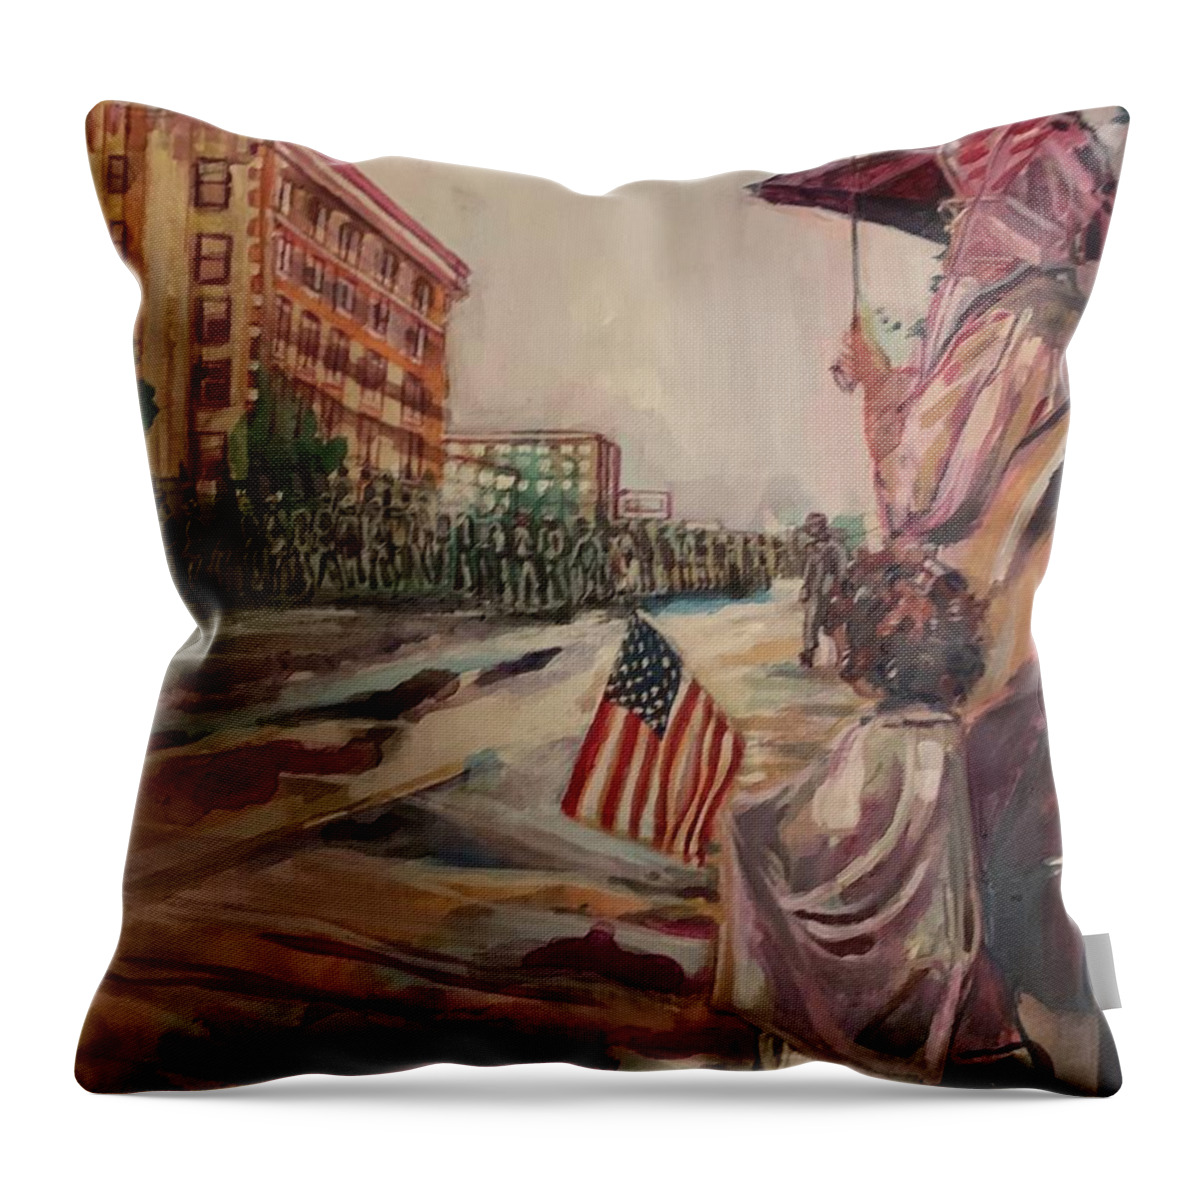 City Throw Pillow featuring the mixed media Dandelion by Try Cheatham